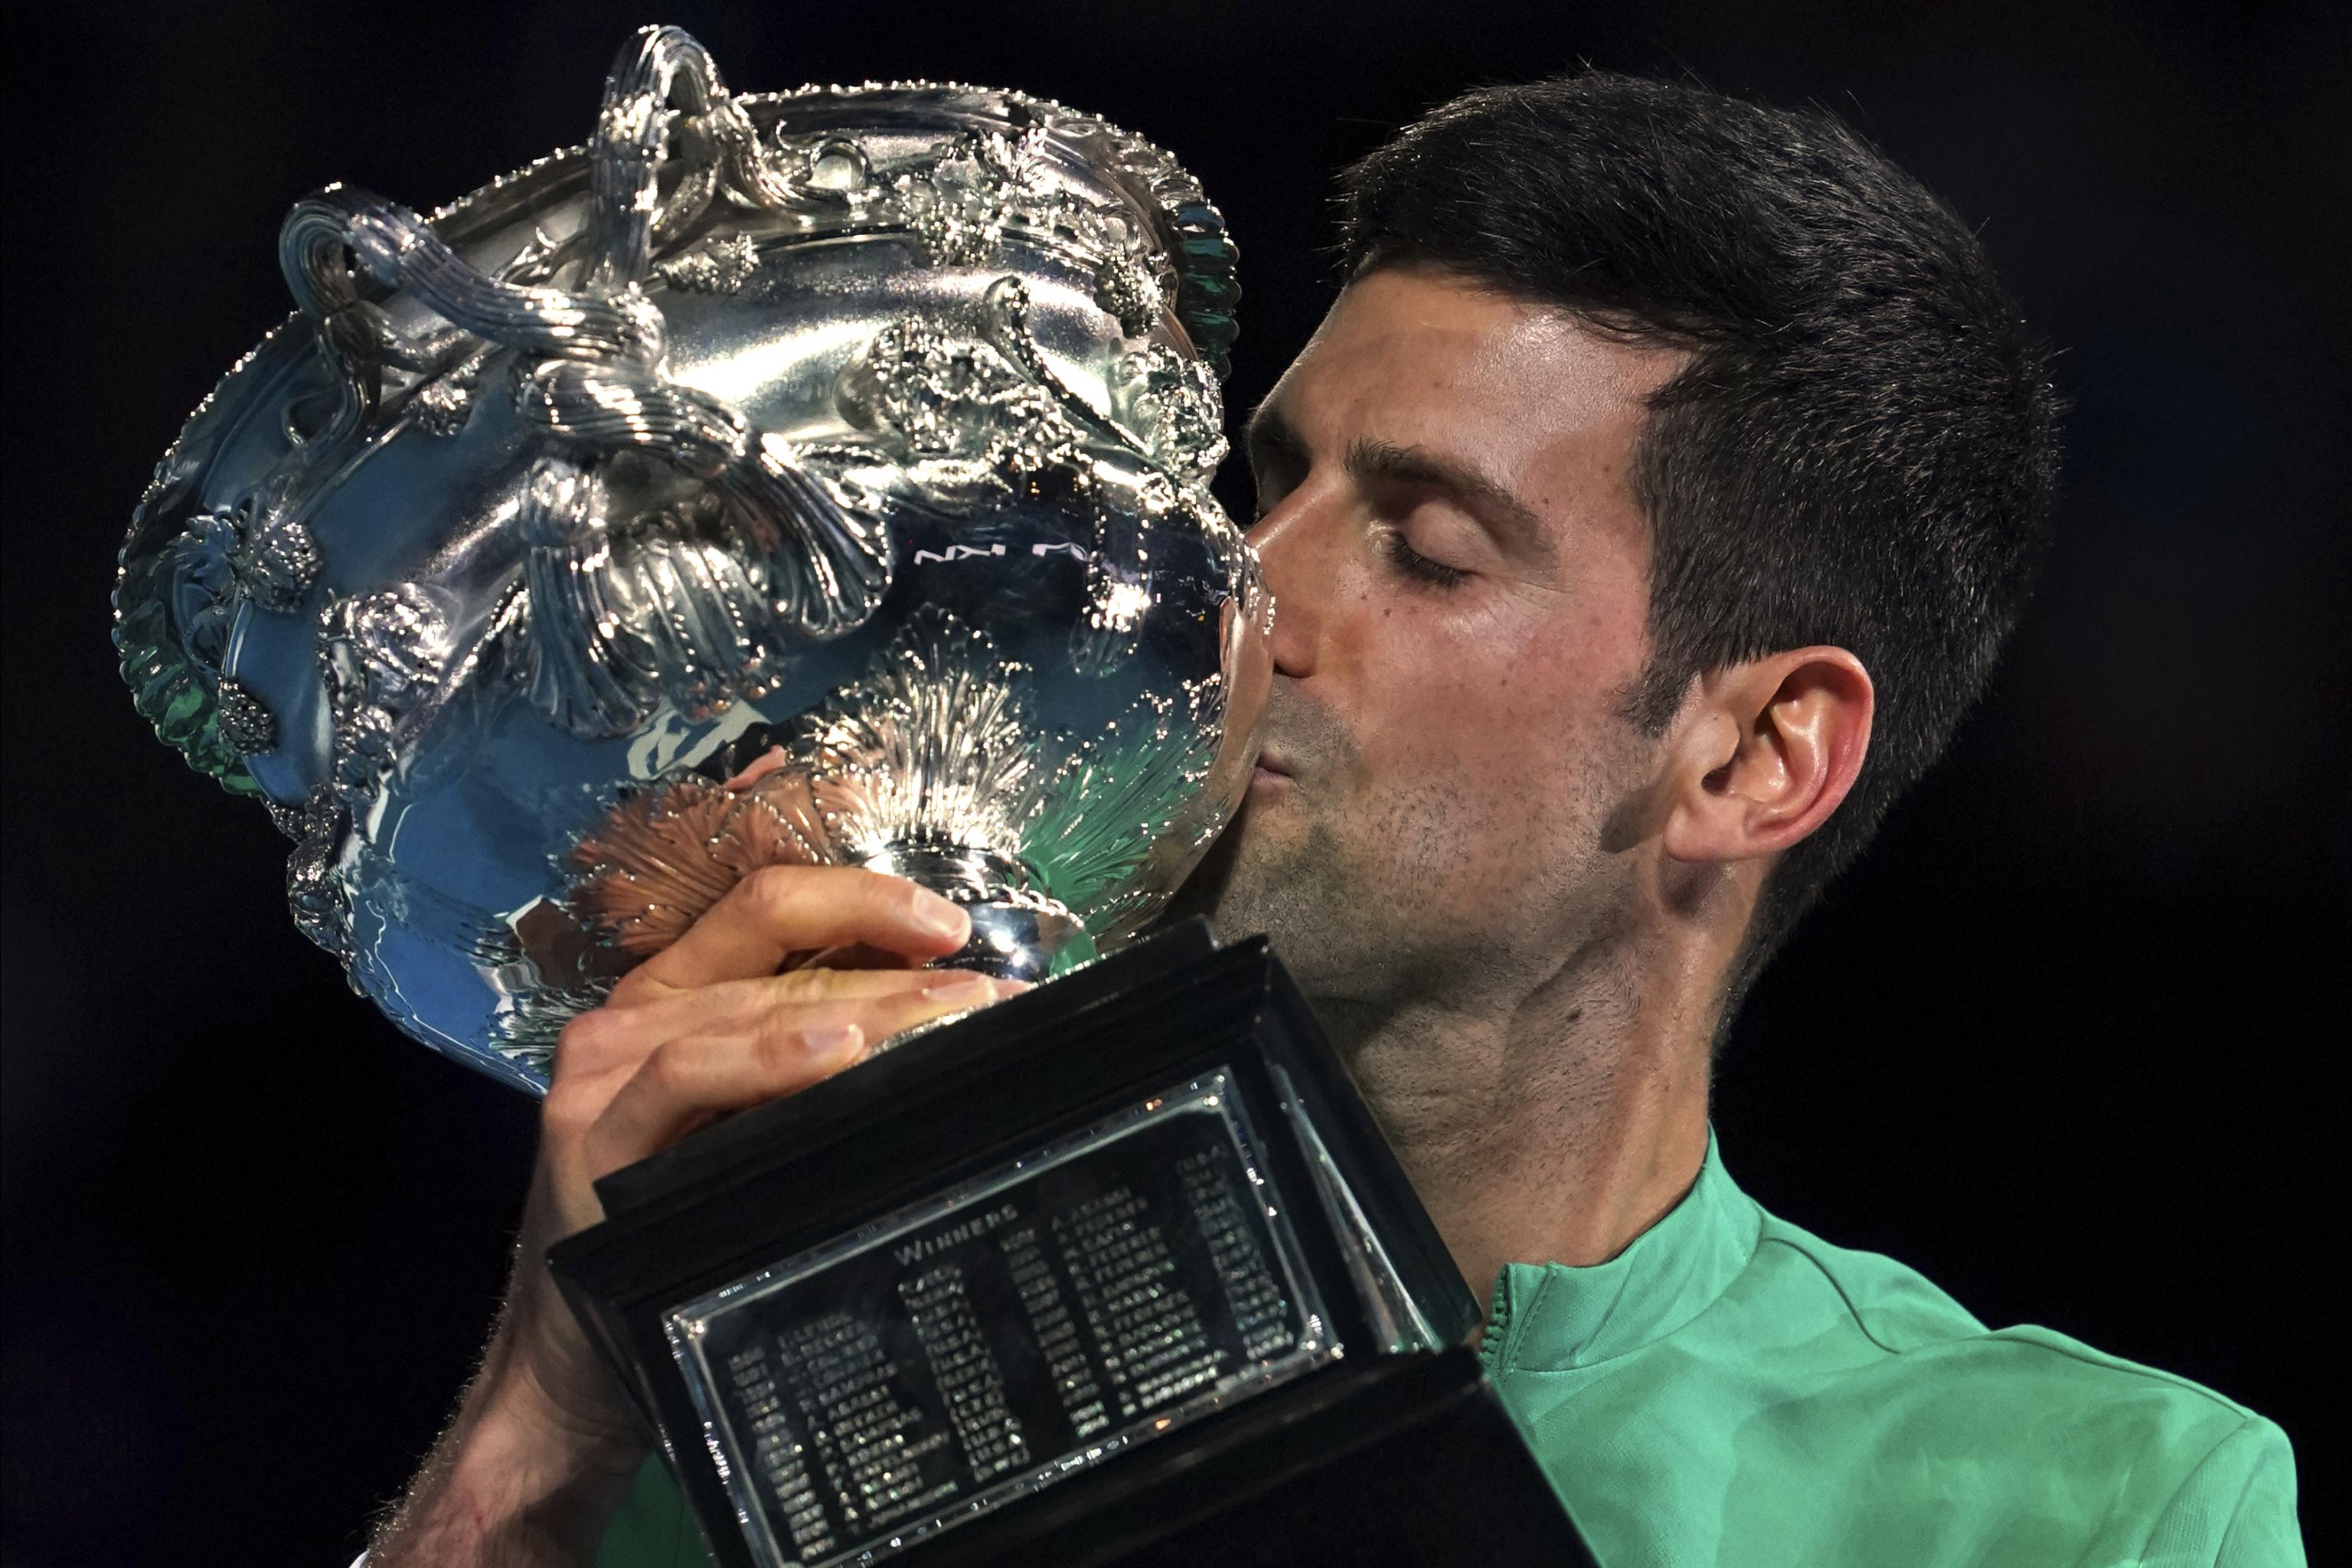 Australian Open 2021: Updated Prize-Money Payouts from Melbourne Bleacher Report | Latest News, and Highlights